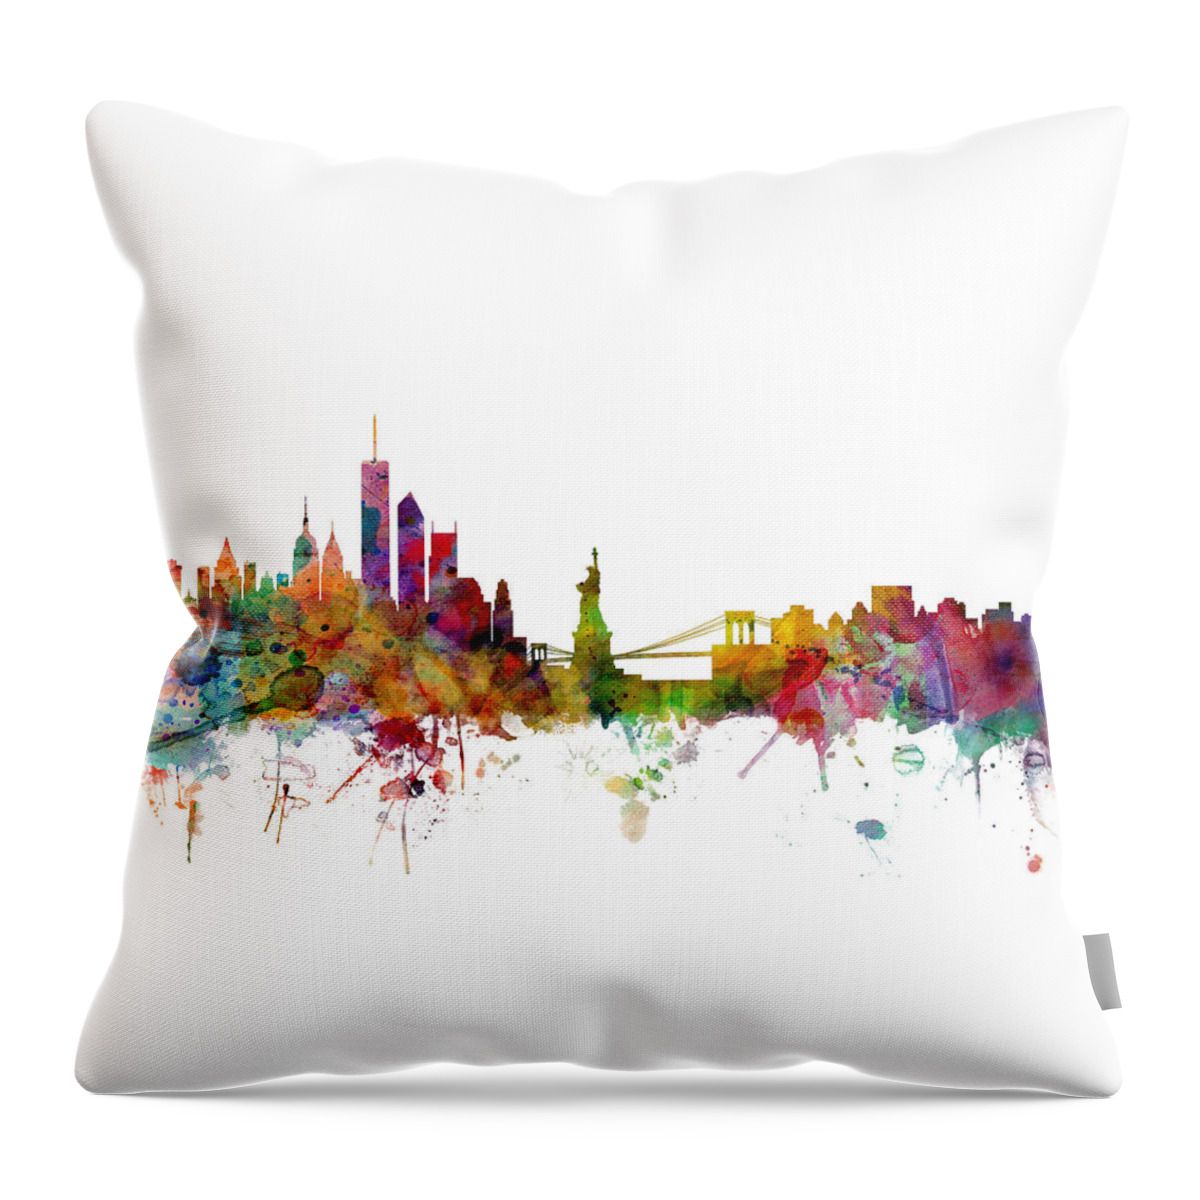 United States Throw Pillow featuring the digital art New York Skyline #32 by Michael Tompsett